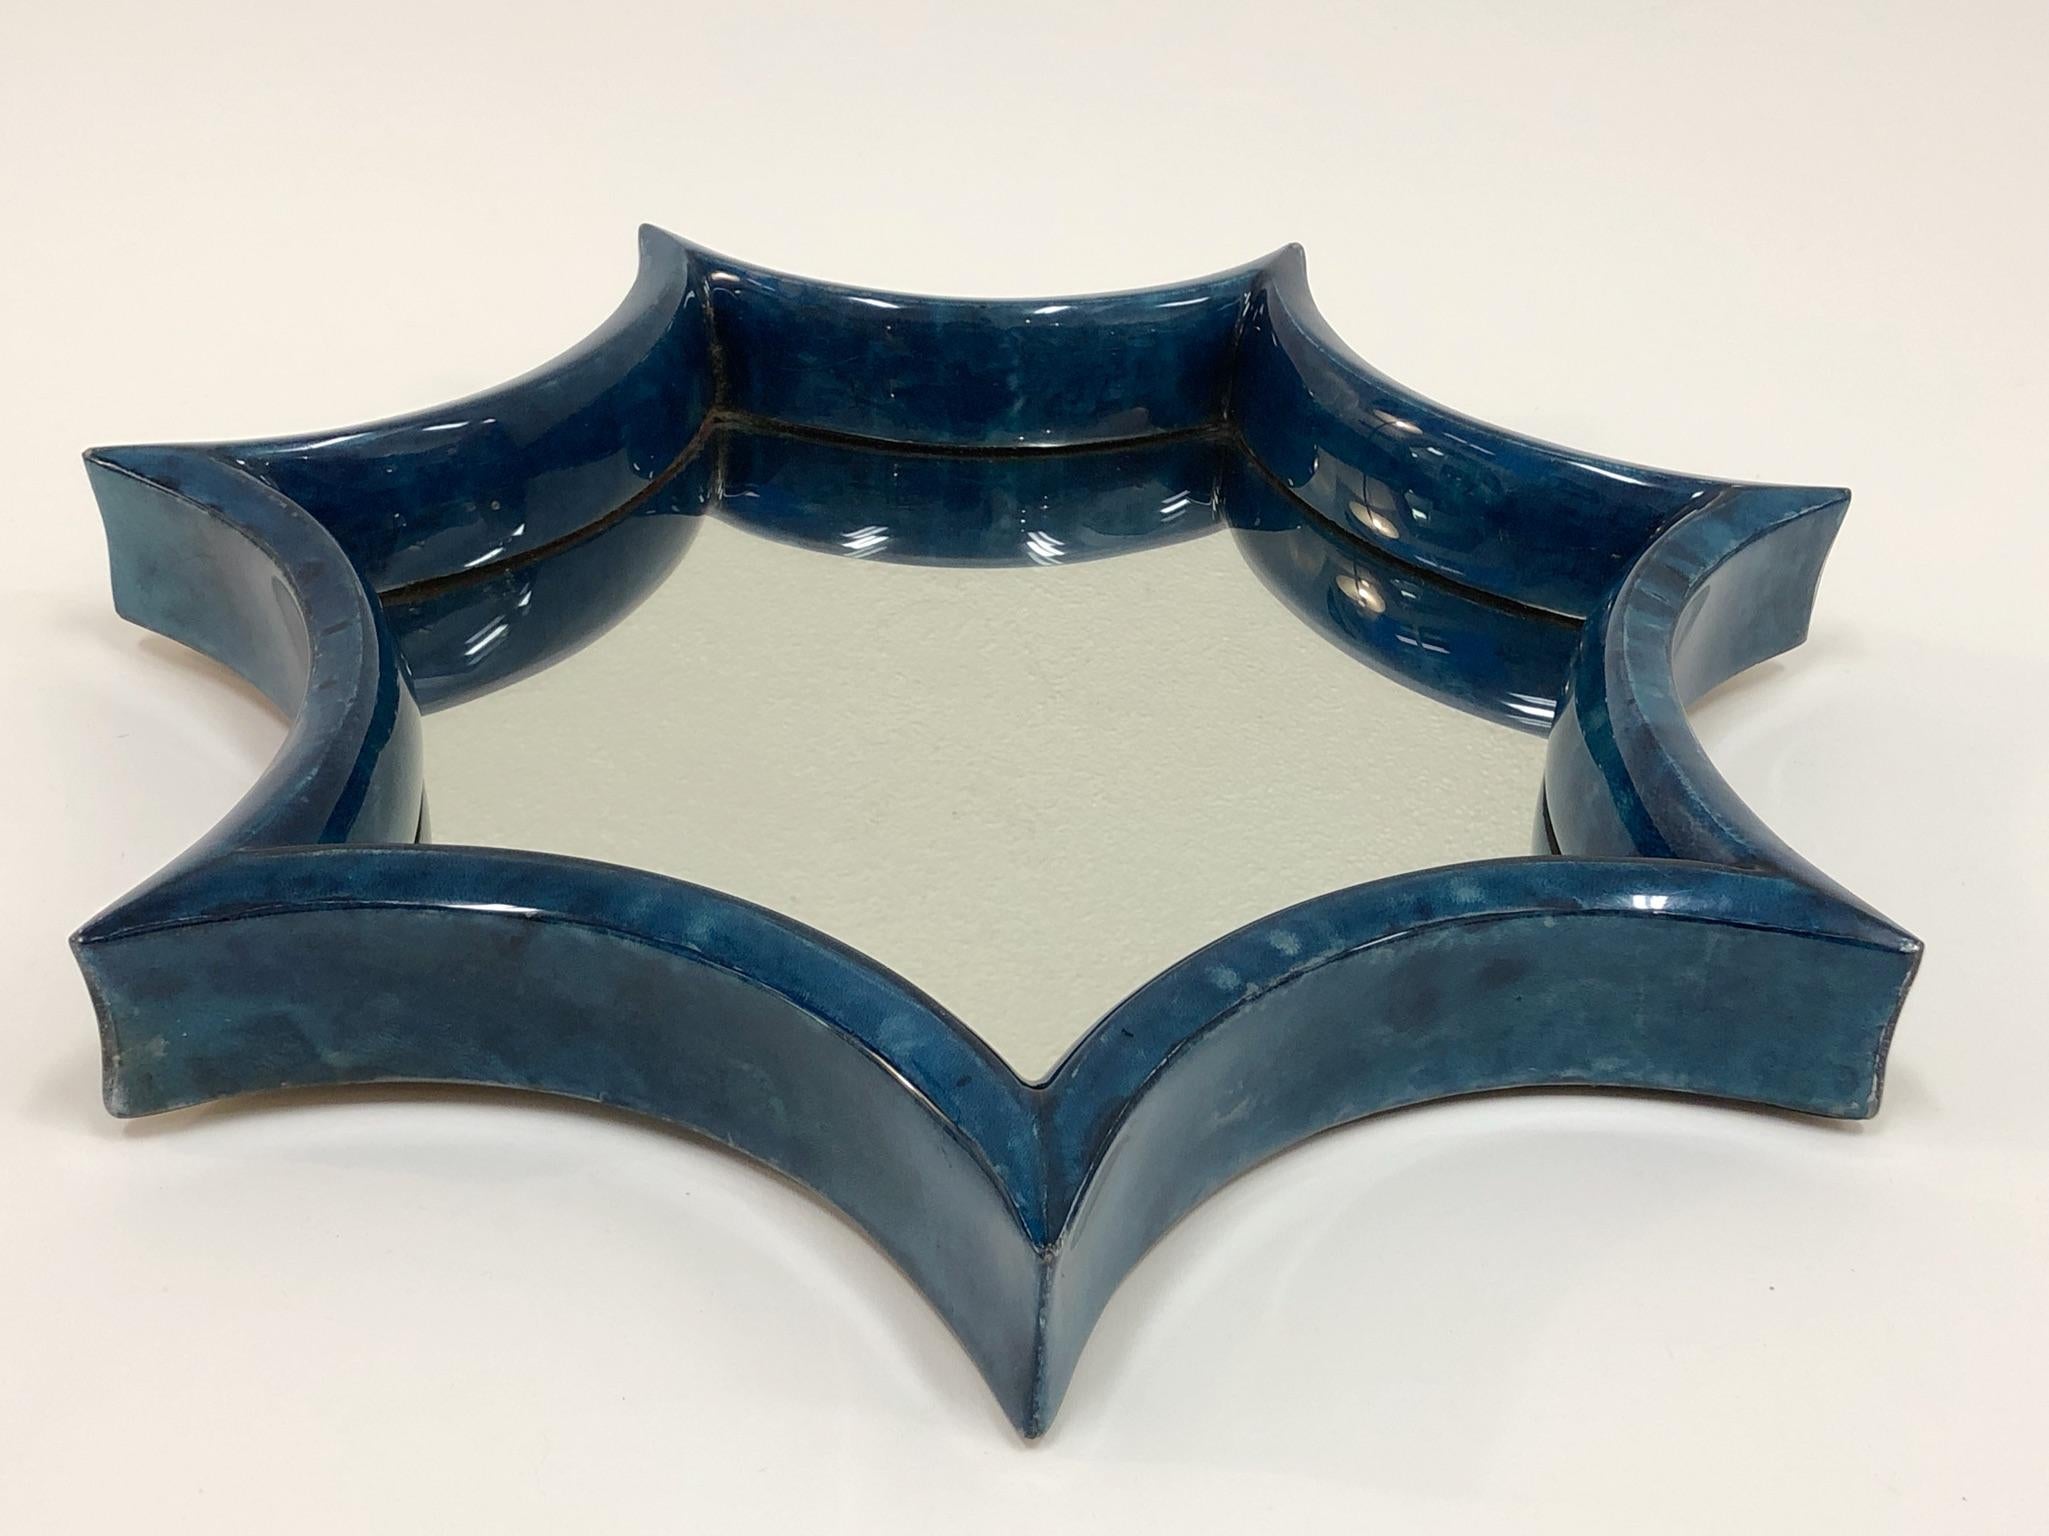 A beautiful 1980s star shape goatskin wall mirror. The frame is constructed of wood covered with blue stained goatskin and then cleared lacquered.
Dimensions: 20” diameter 2” deep.